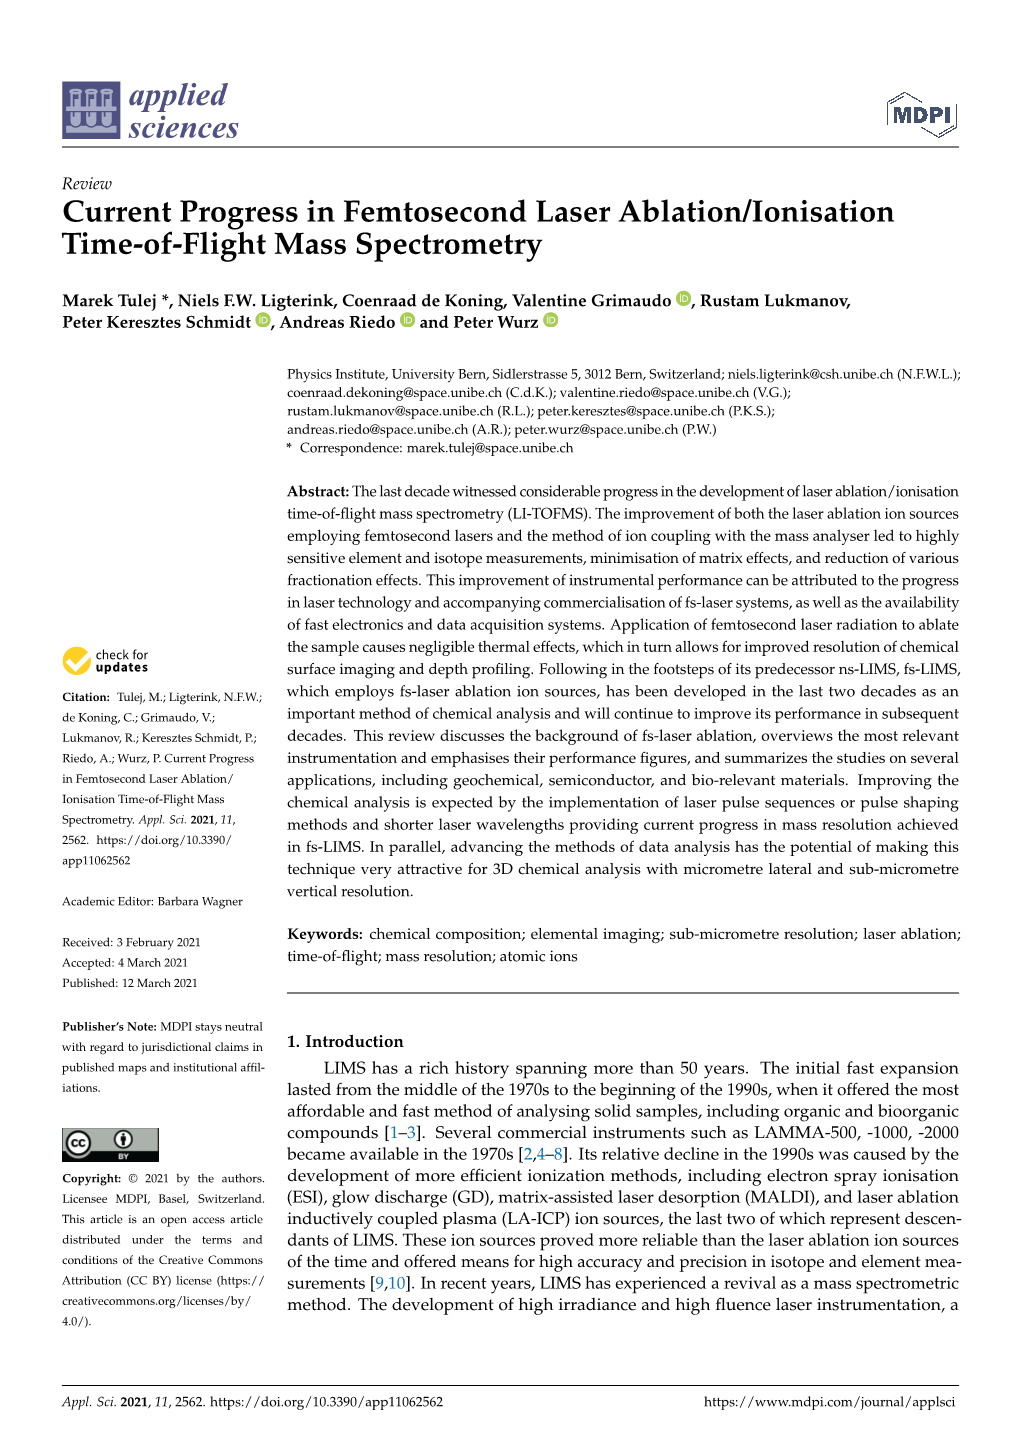 Current Progress in Femtosecond Laser Ablation/Ionisation Time-Of-Flight Mass Spectrometry